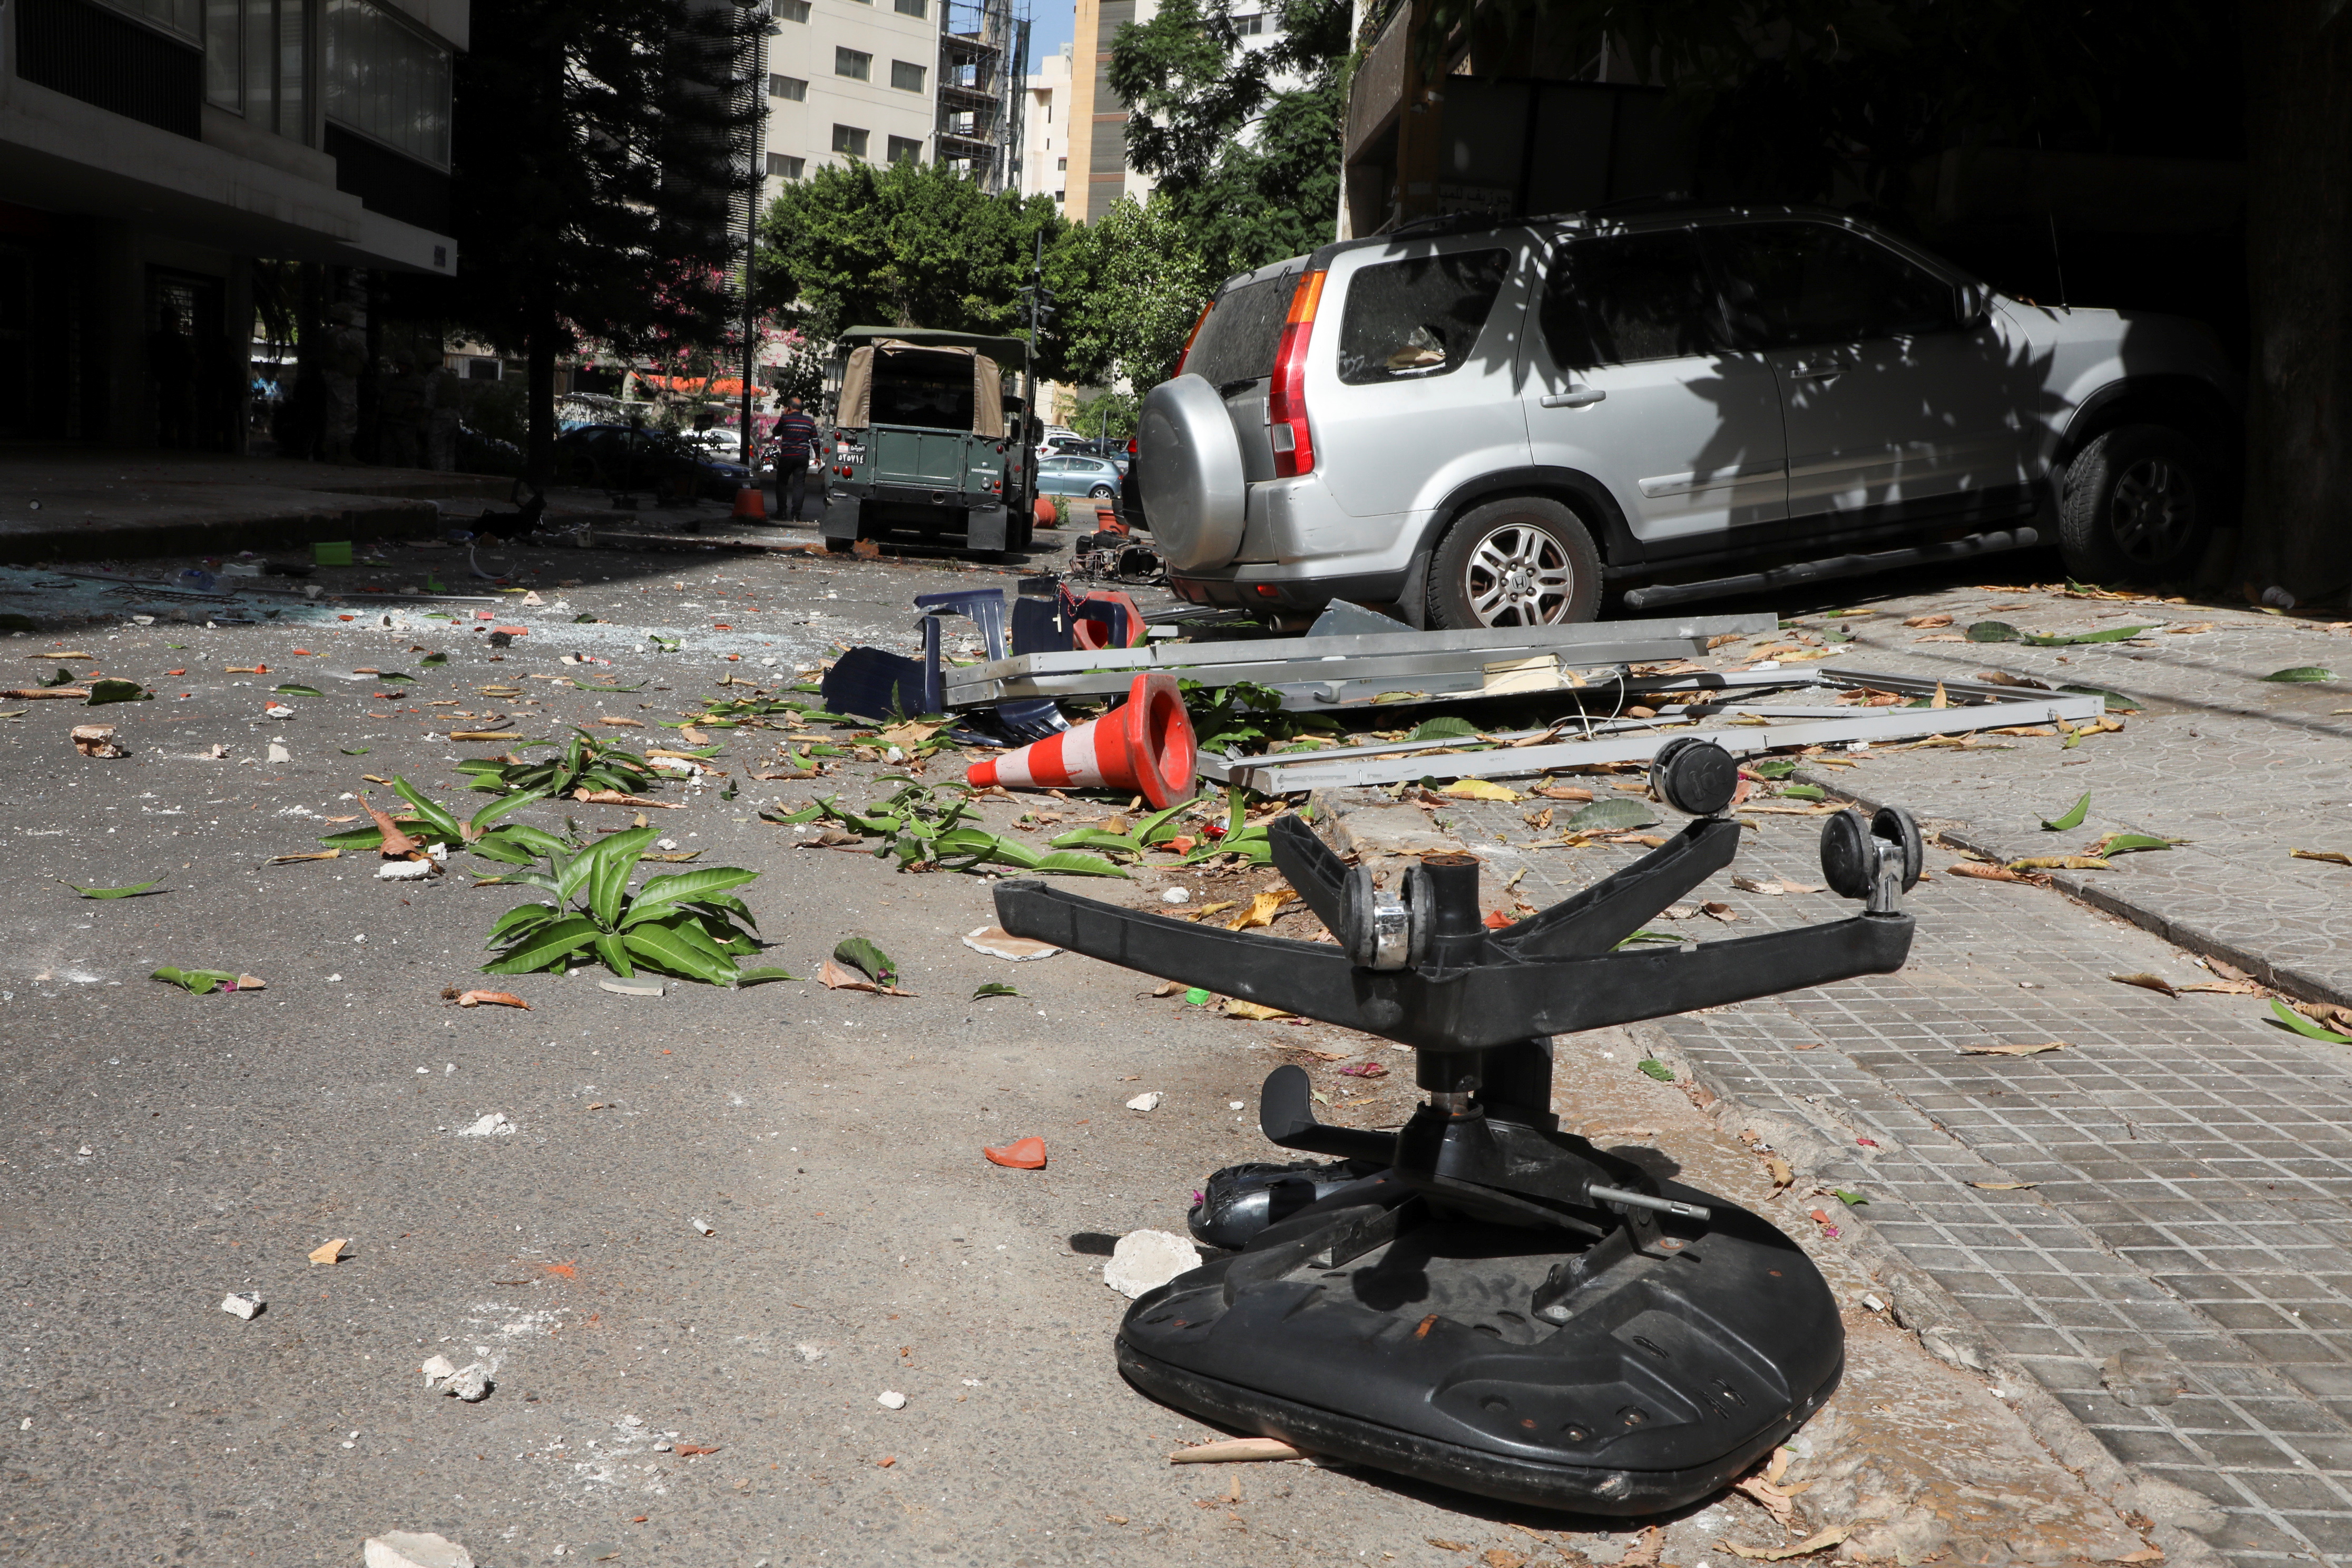 Shattered glass and debris are seen after gunfire erupted in Beirut